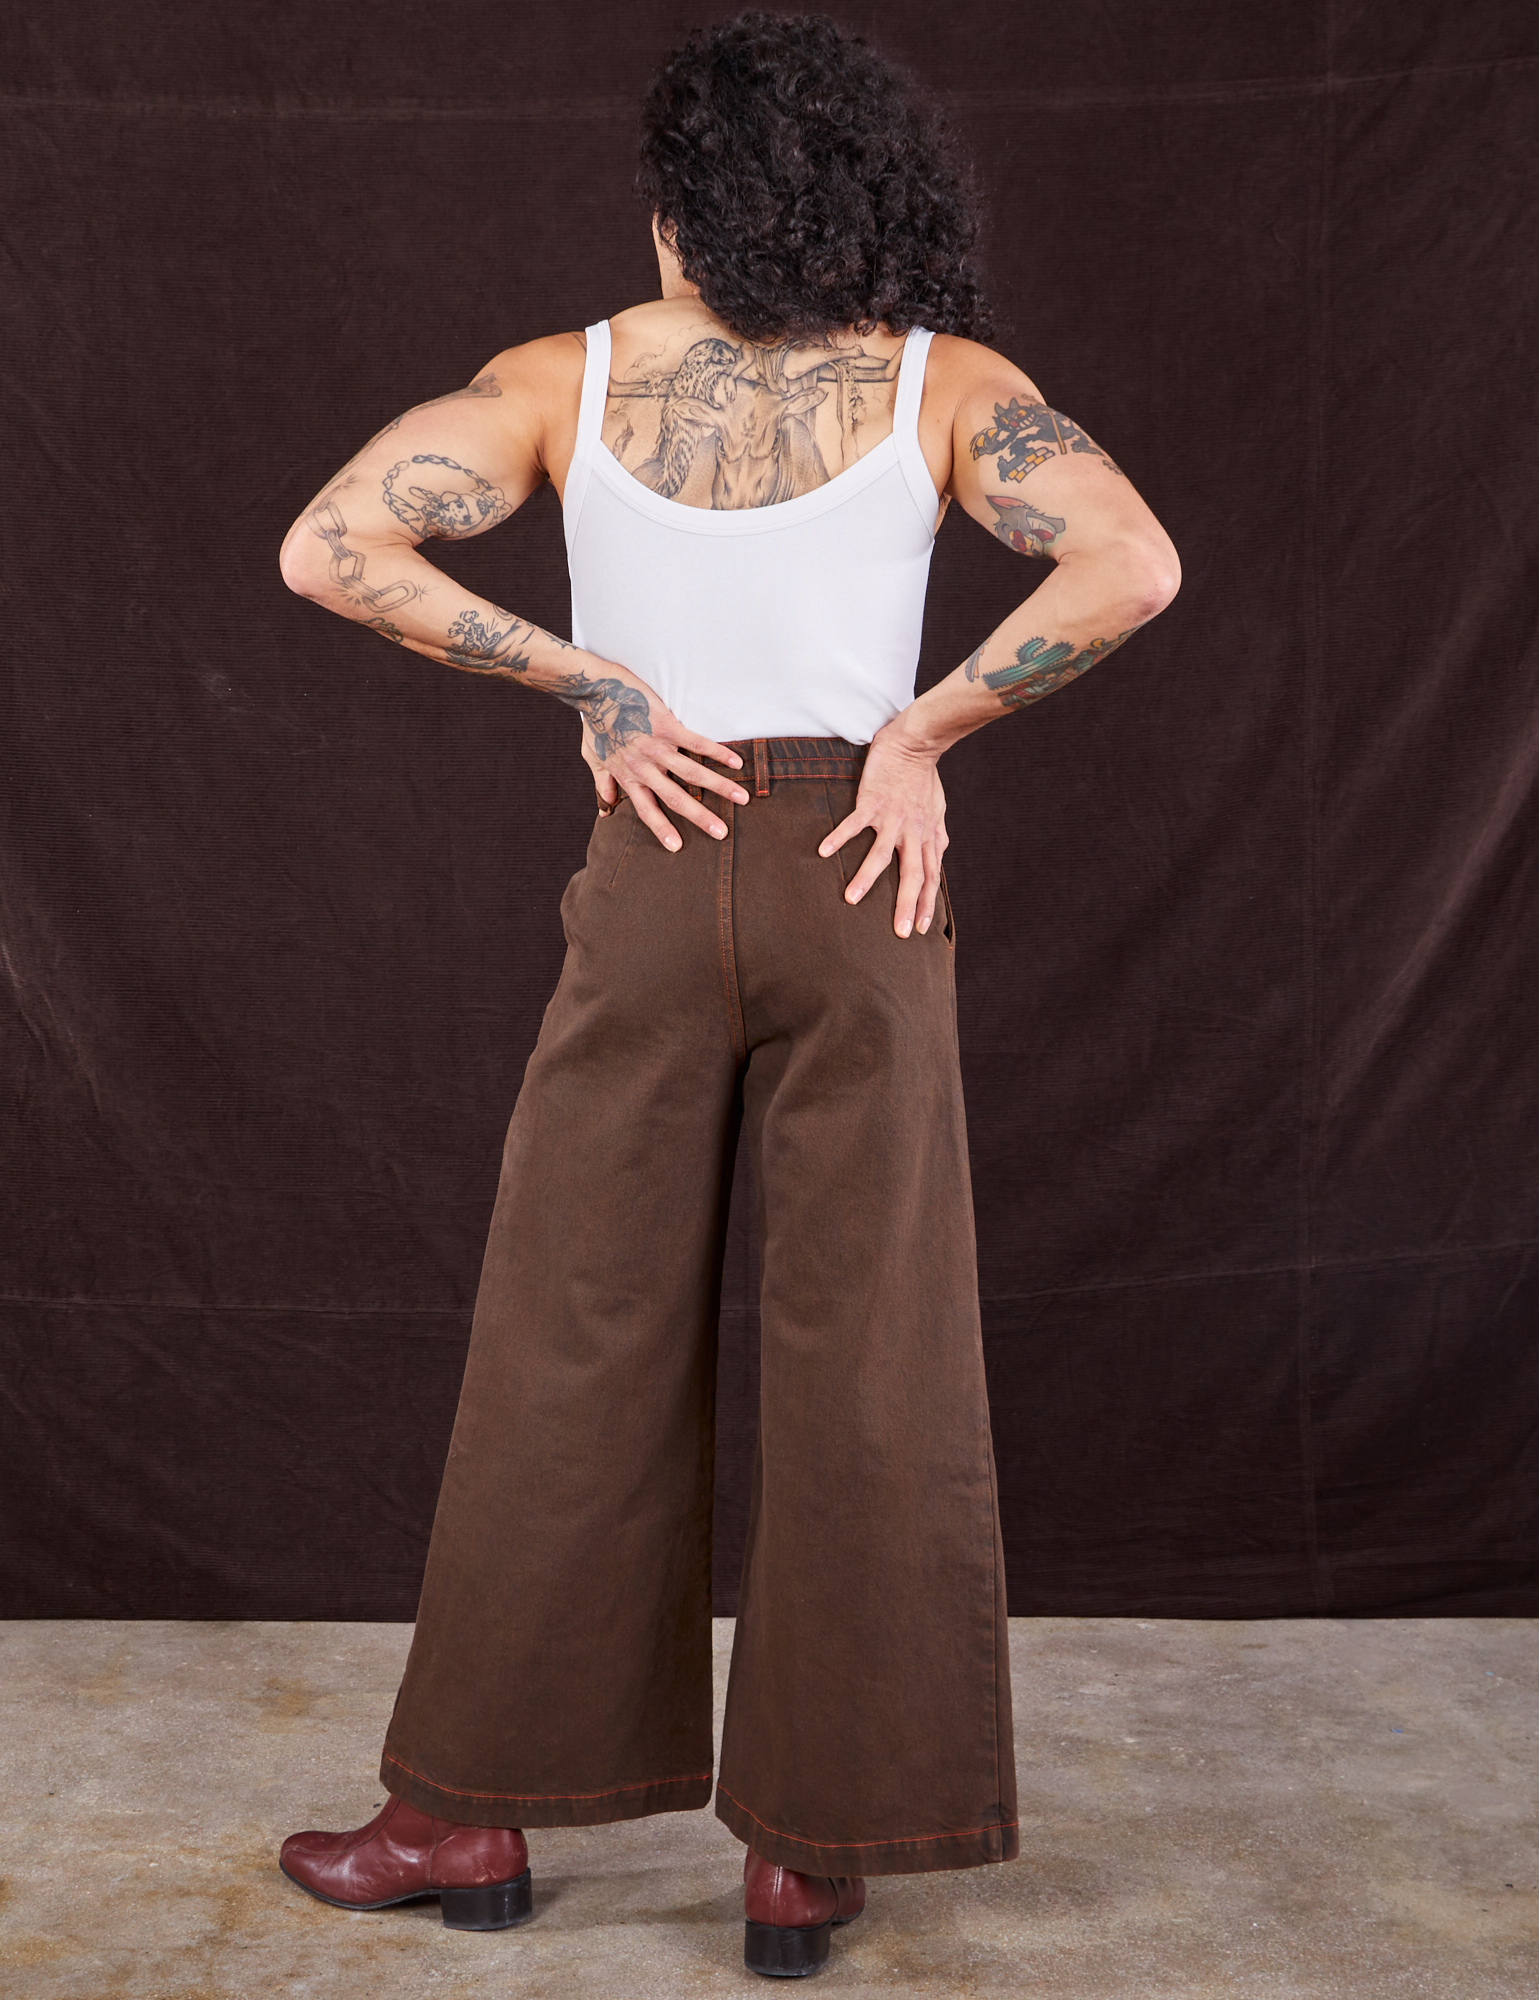 Buy Brown Trousers & Pants for Women by Wknd Online | Ajio.com